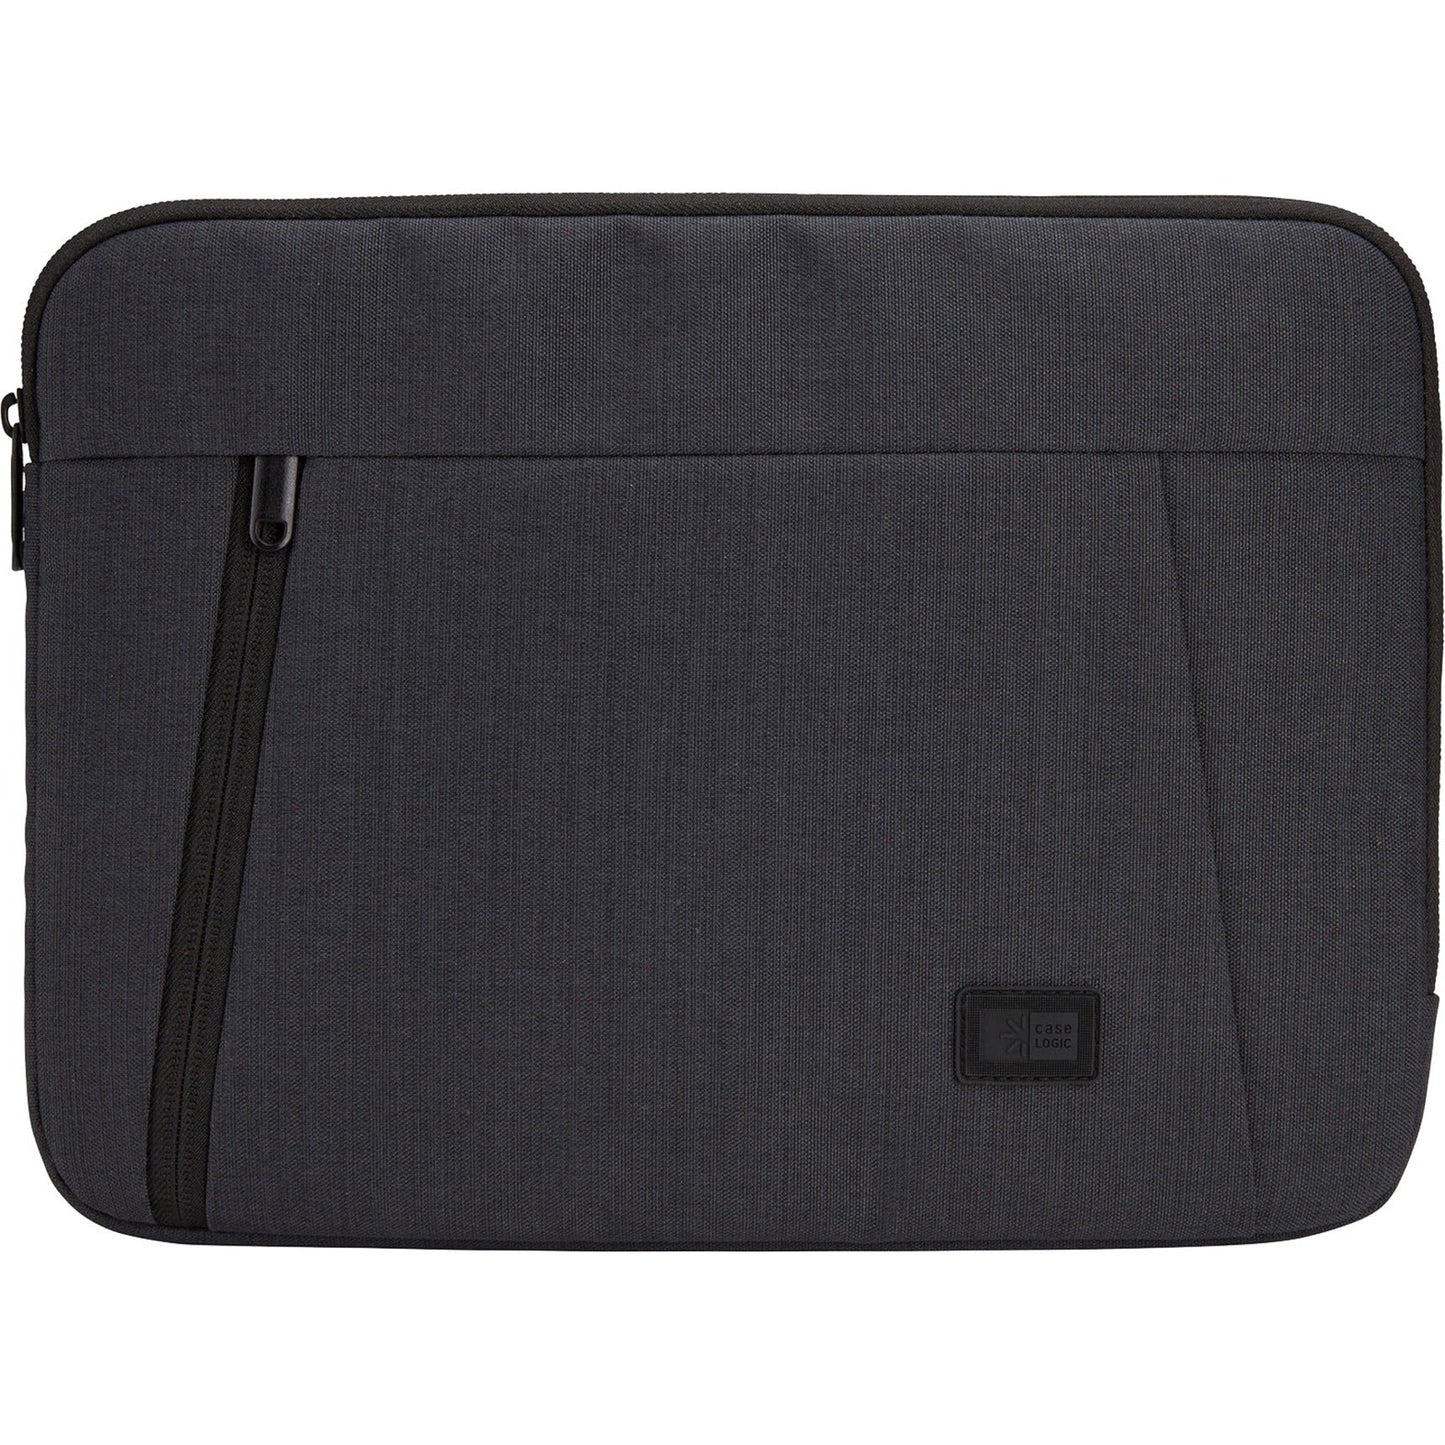 Case Logic Huxton HUXS-211 Carrying Case (Sleeve) for 11.6" Notebook Accessories - Black